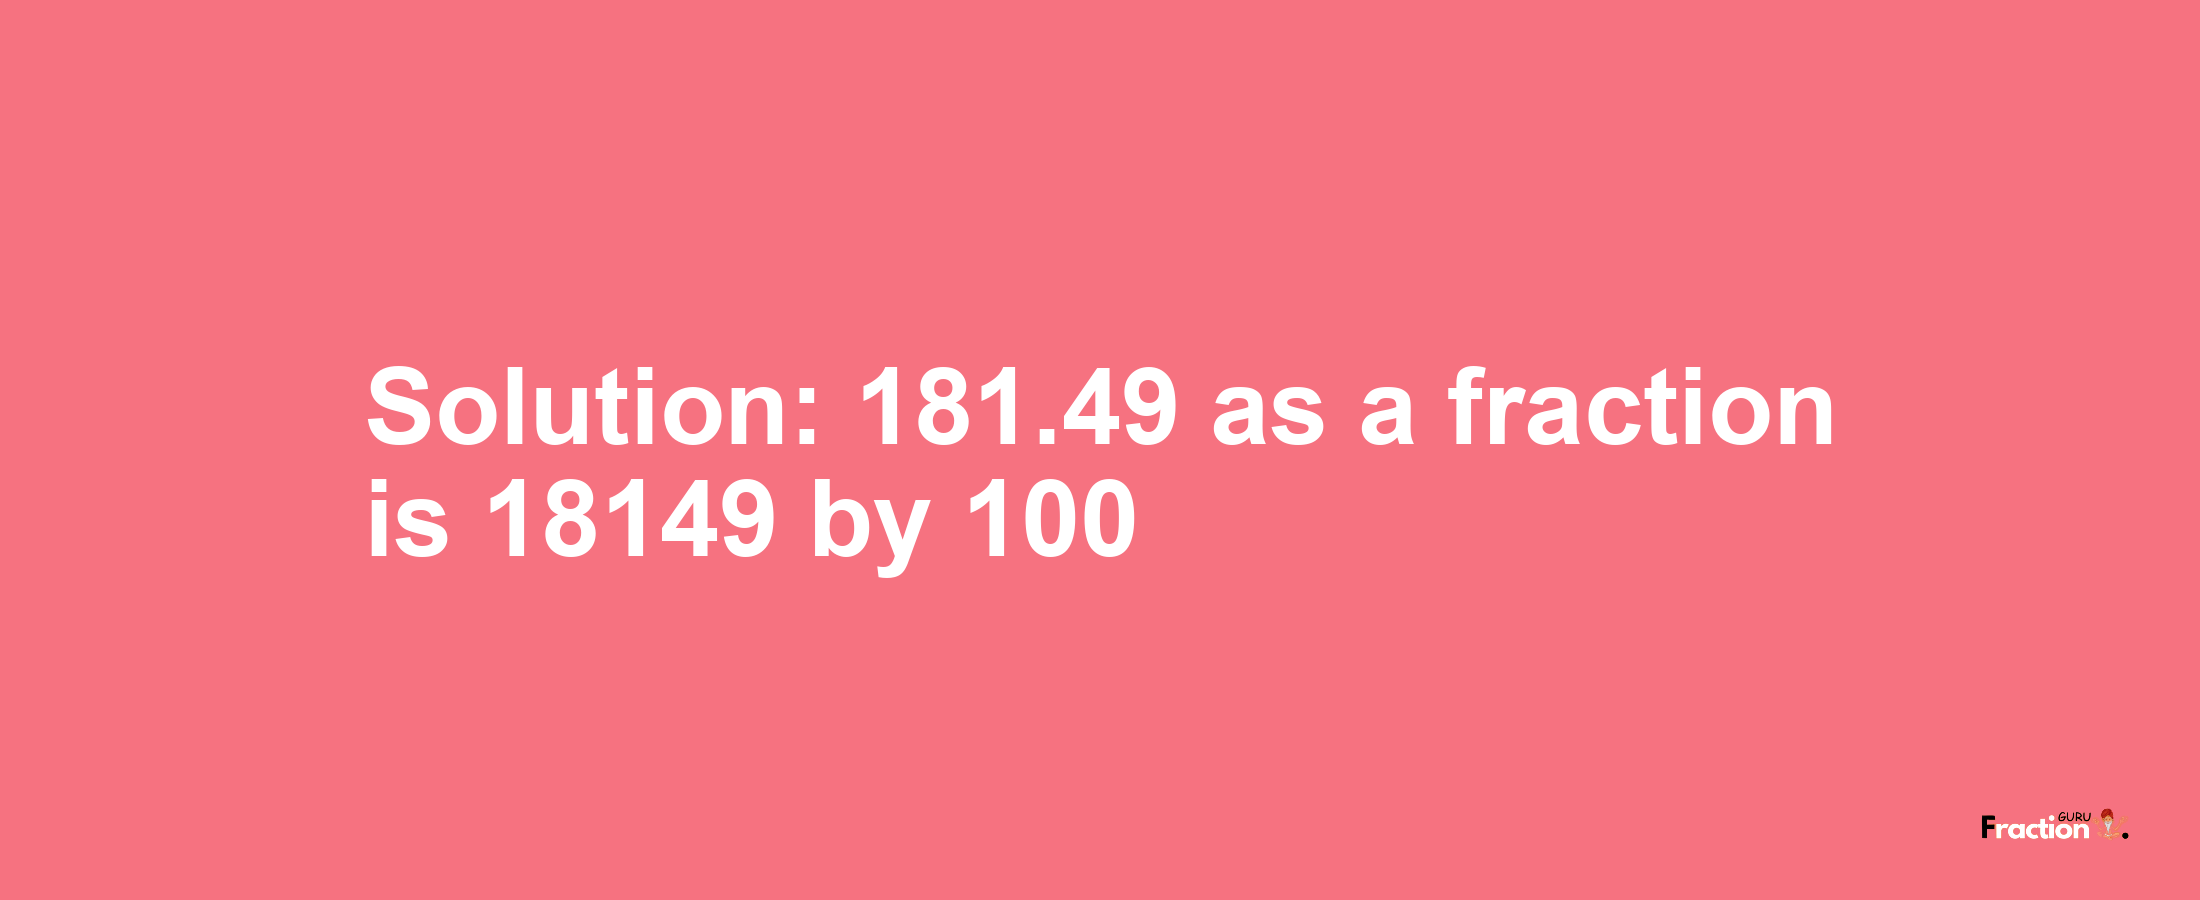 Solution:181.49 as a fraction is 18149/100